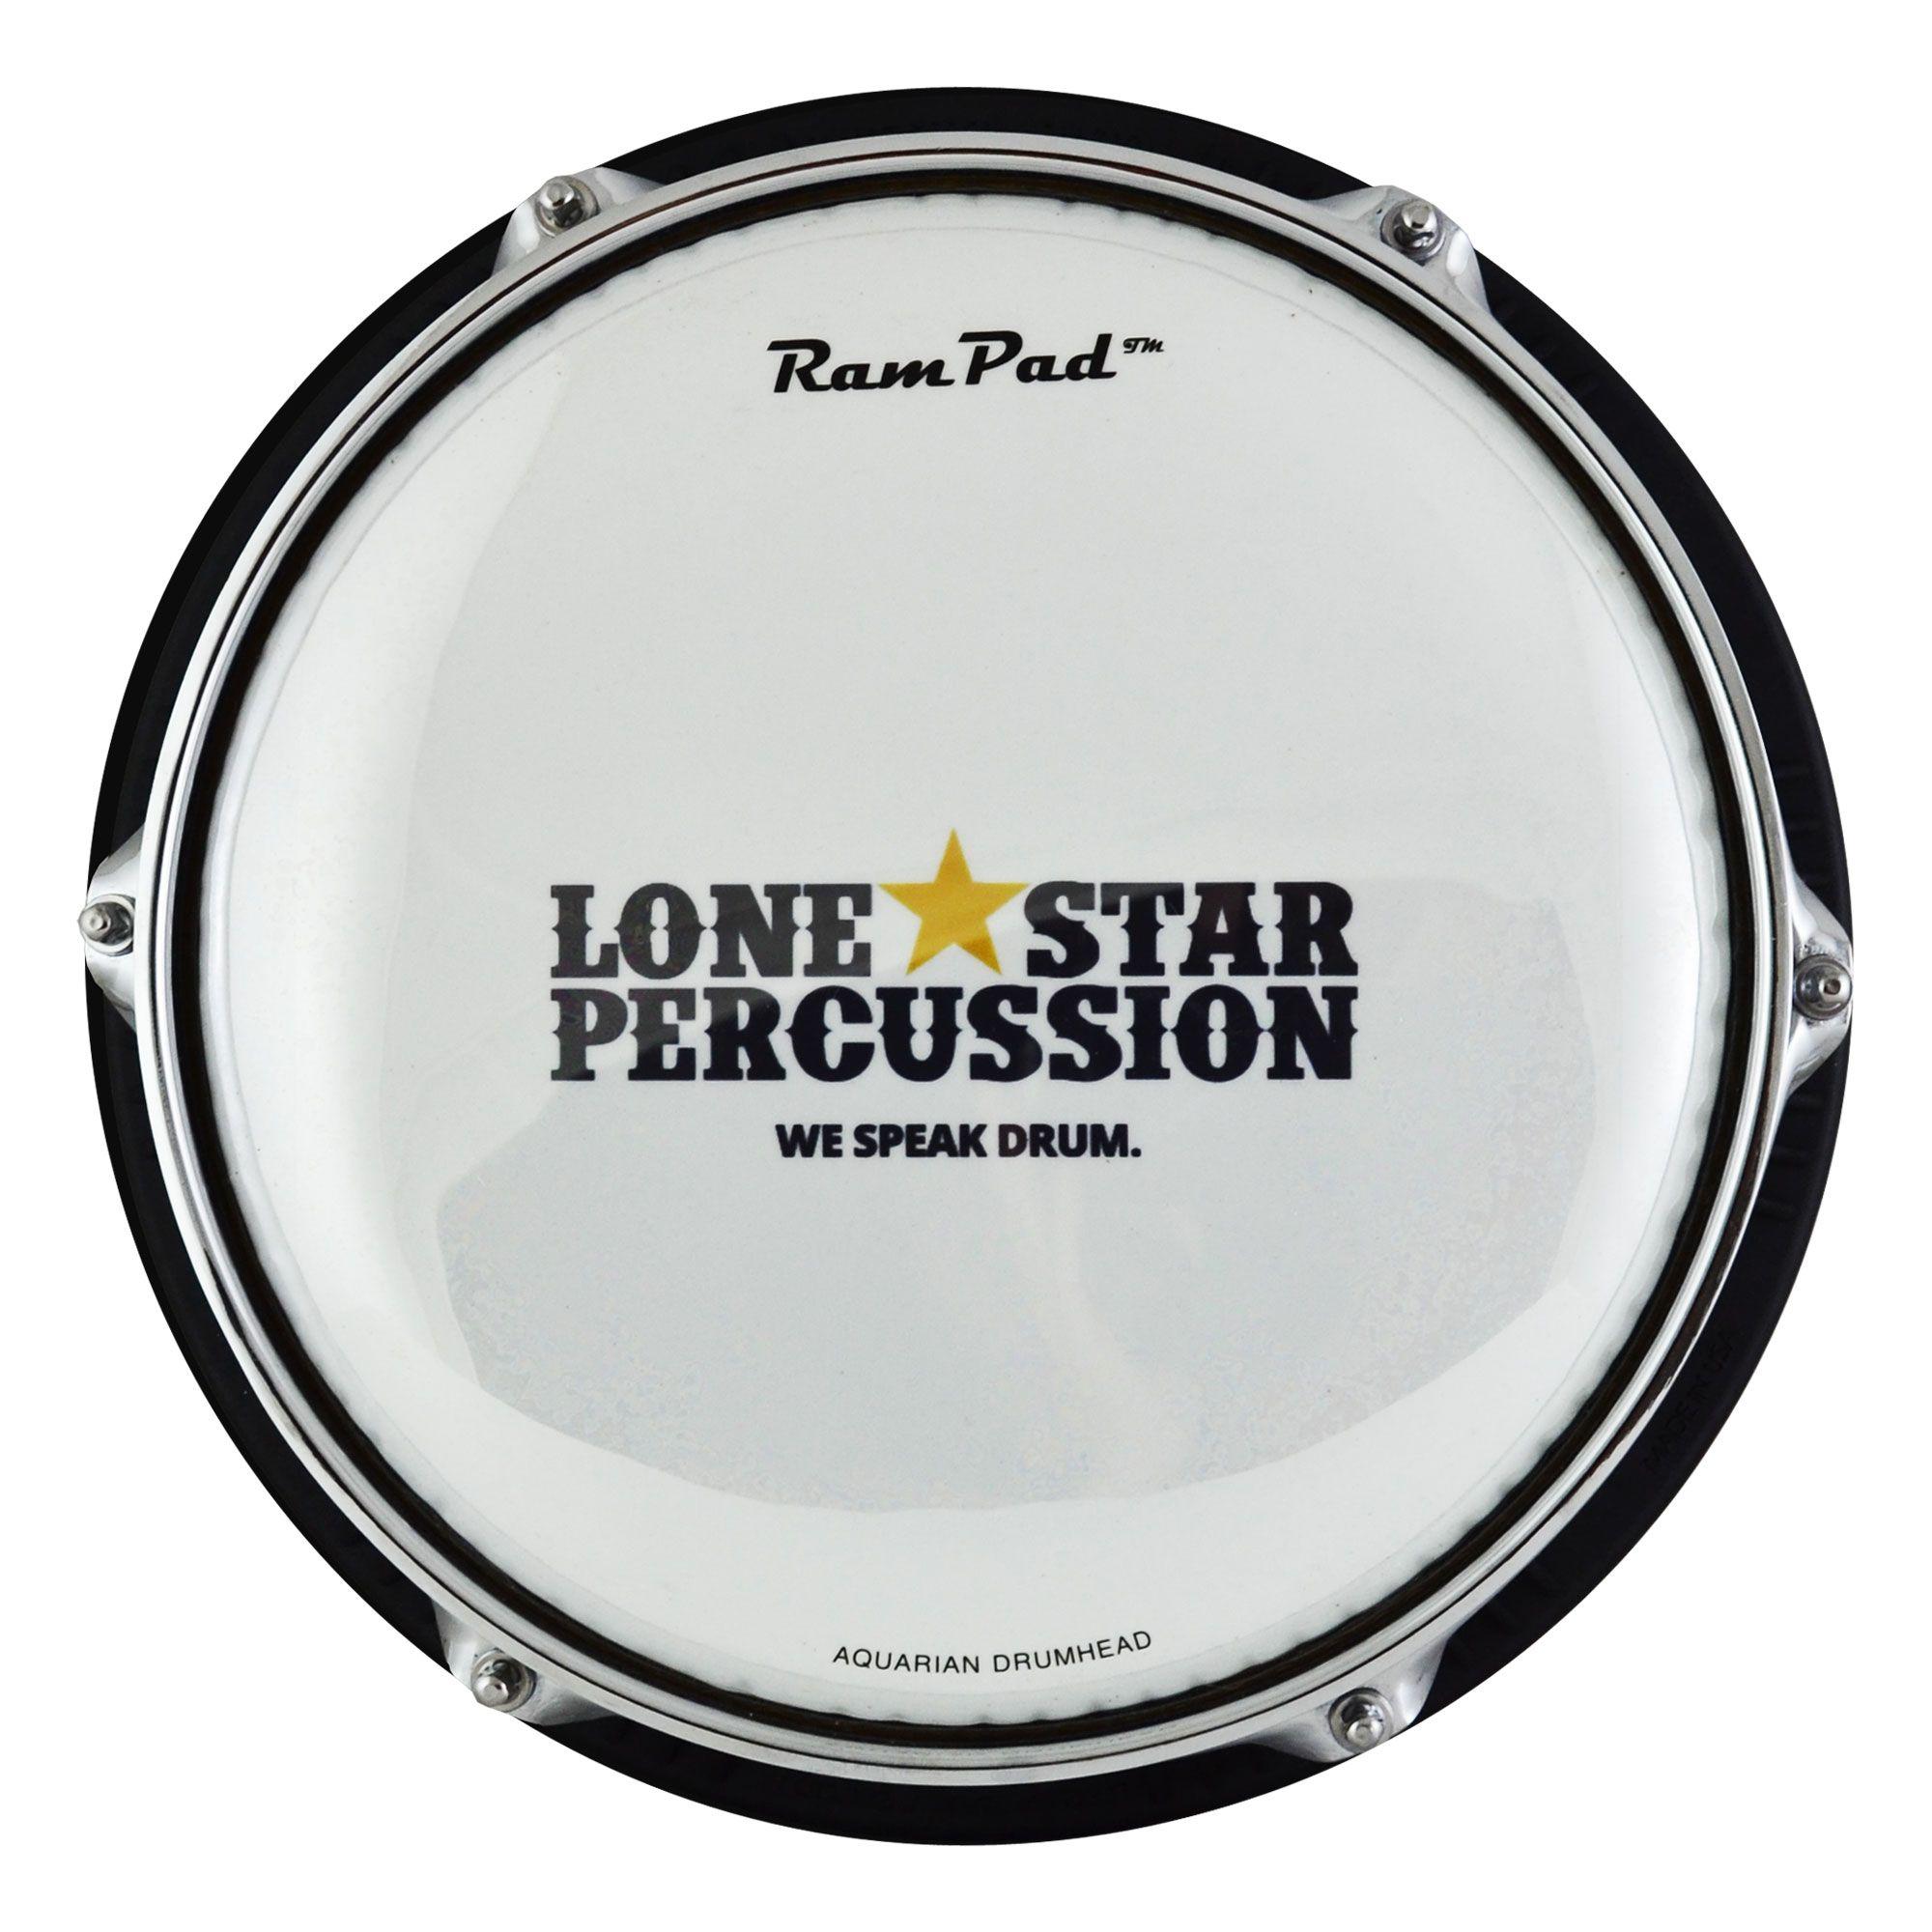 Drum Logo - Rampad 10 Marching Practice Pad with Lone Star Percussion Logo